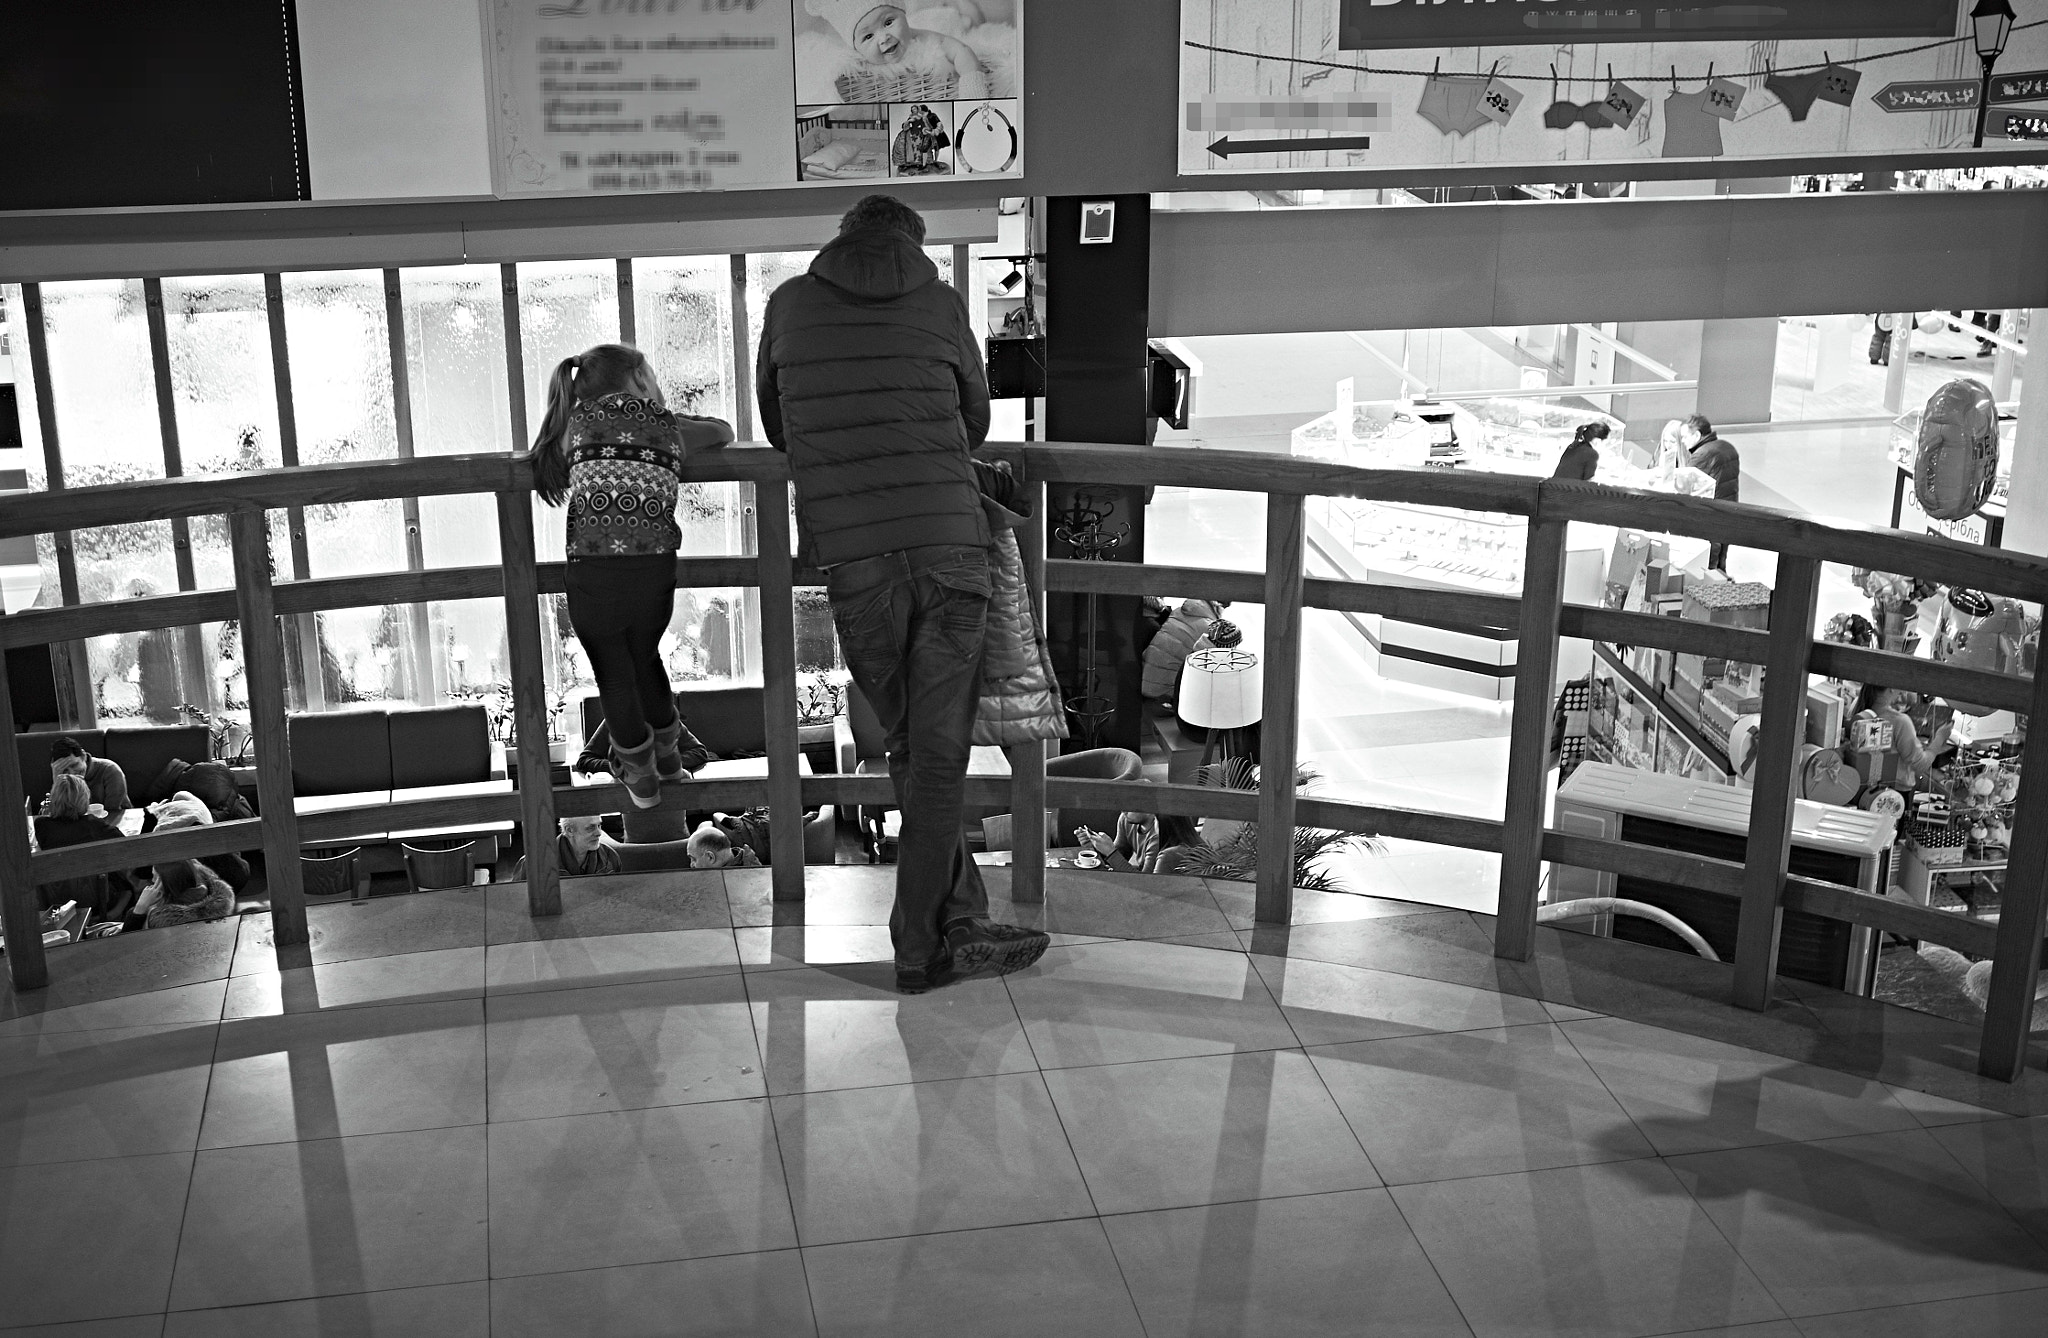 Fujifilm X-M1 sample photo. Observing shoppers photography